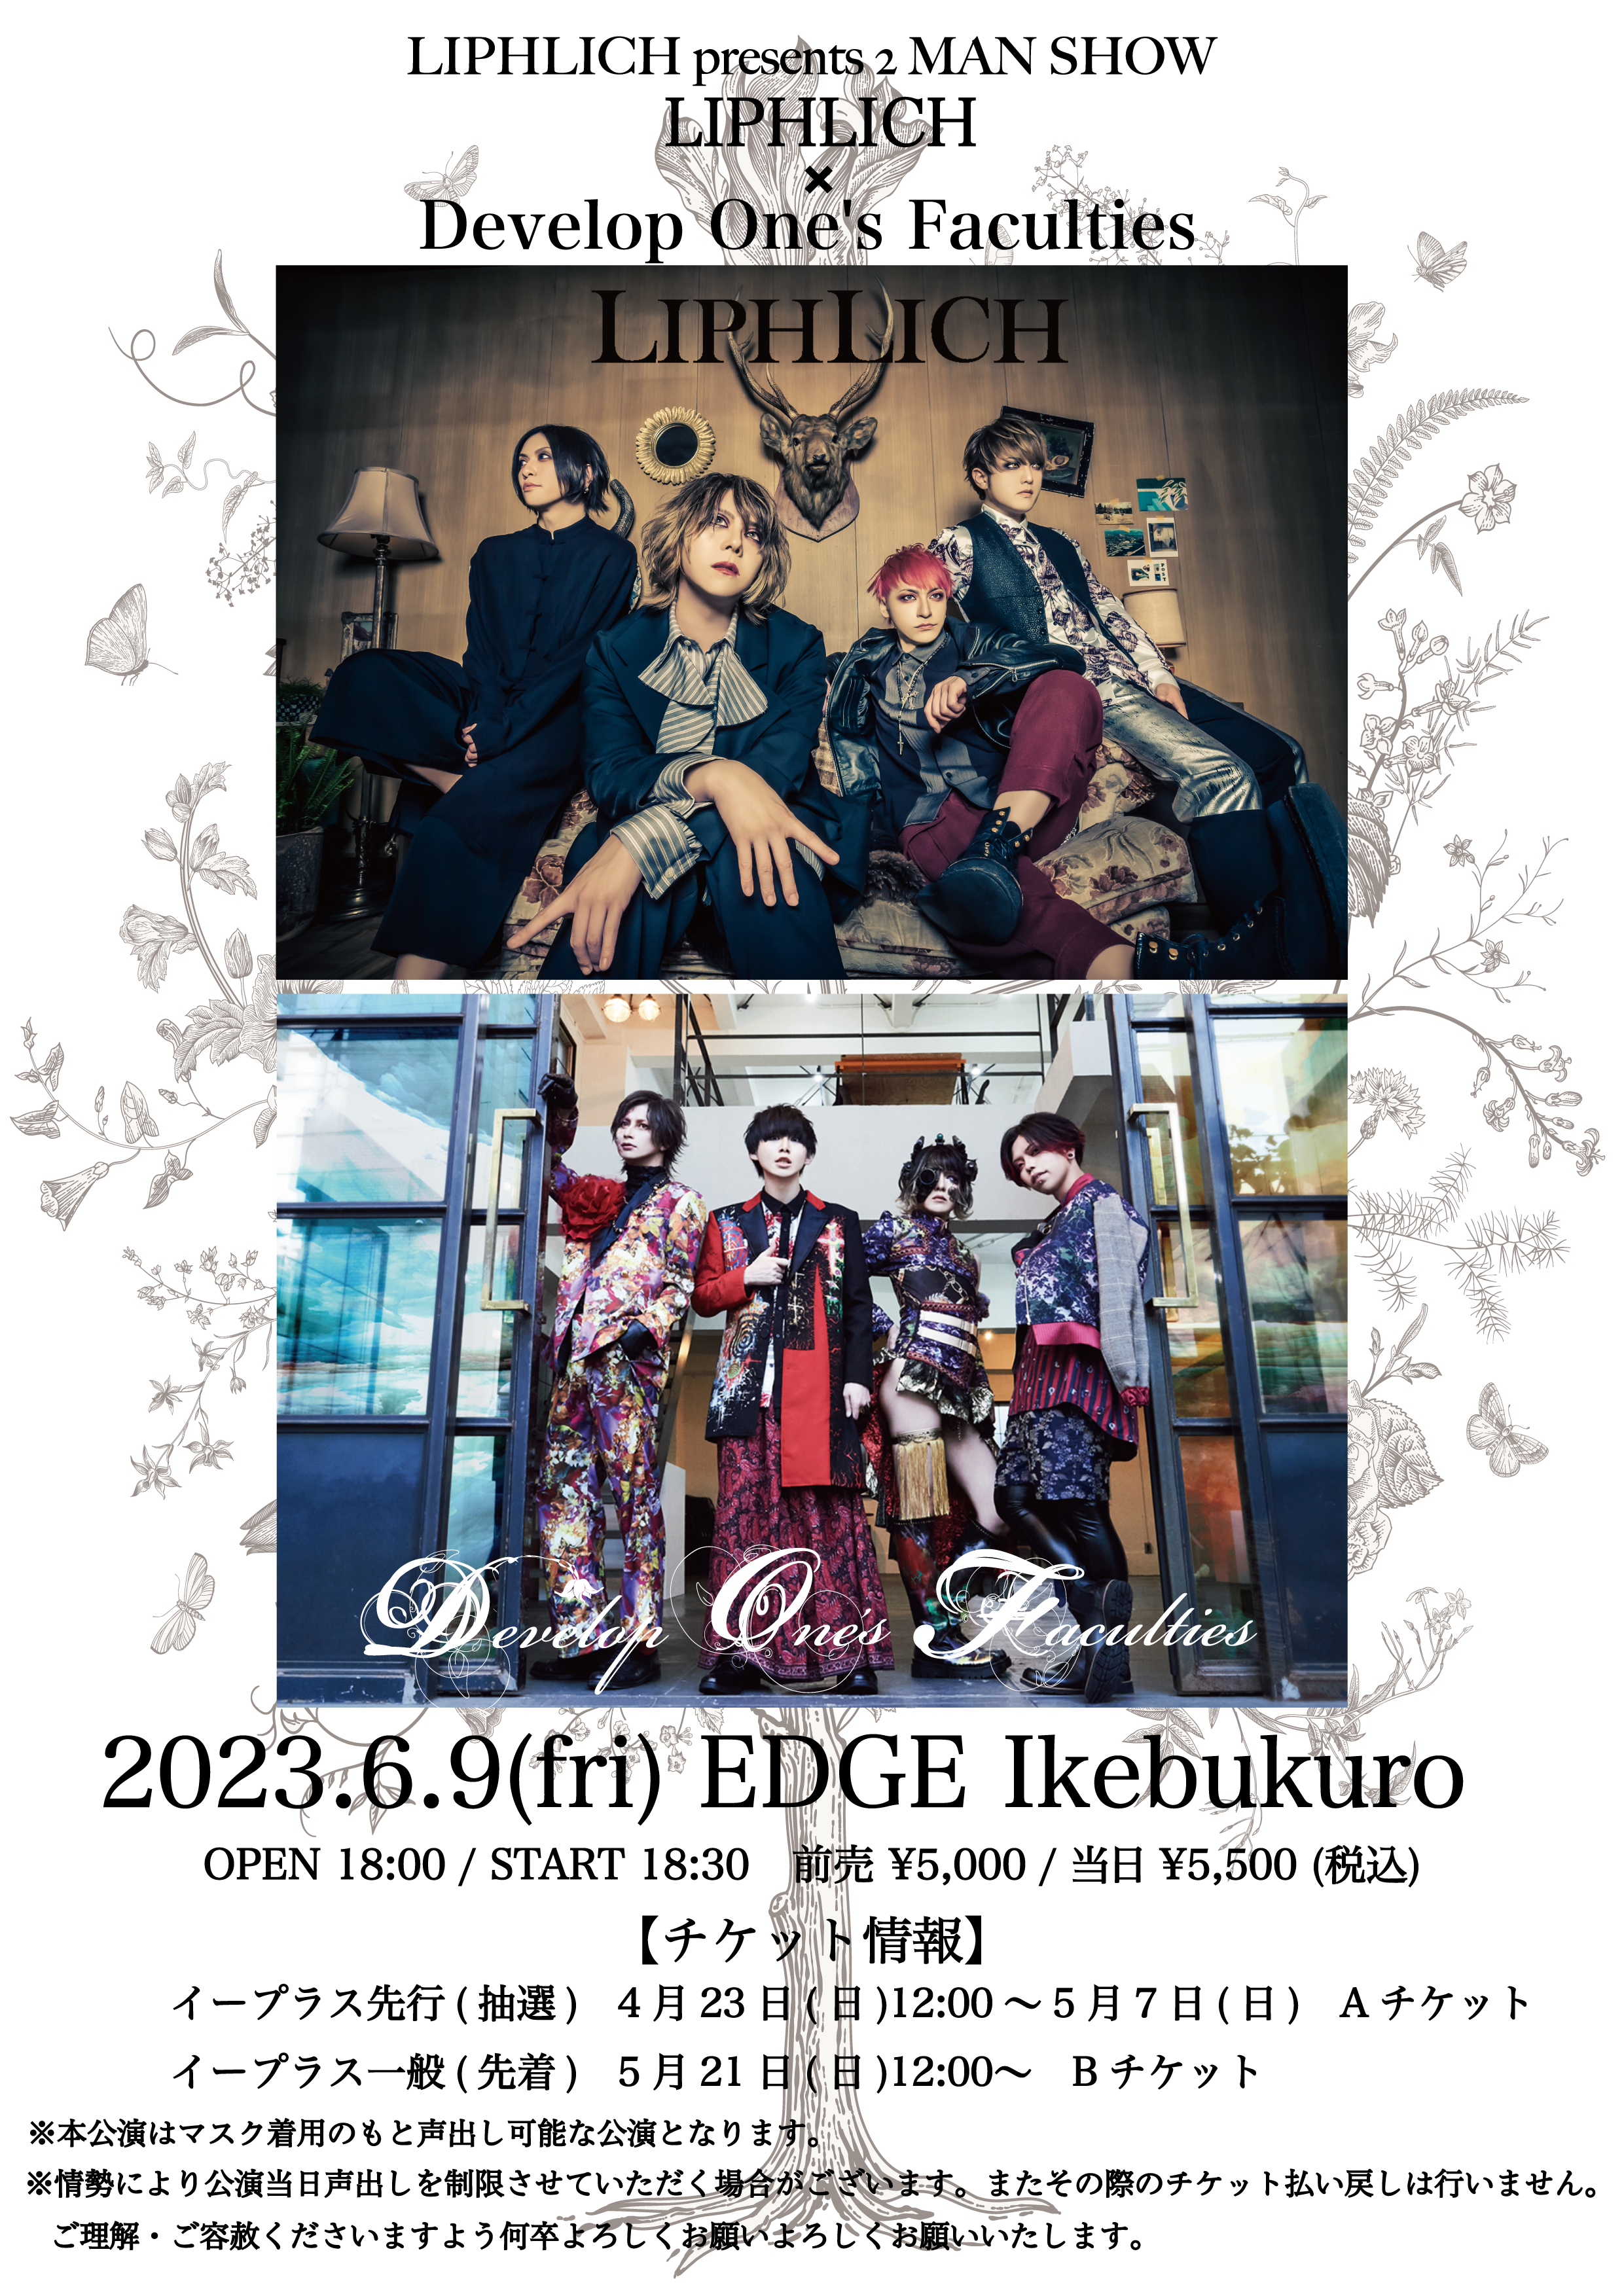 LIPHLICH presents 2 MAN SHOW「LIPHLICH × Develop One’s Faculties 」